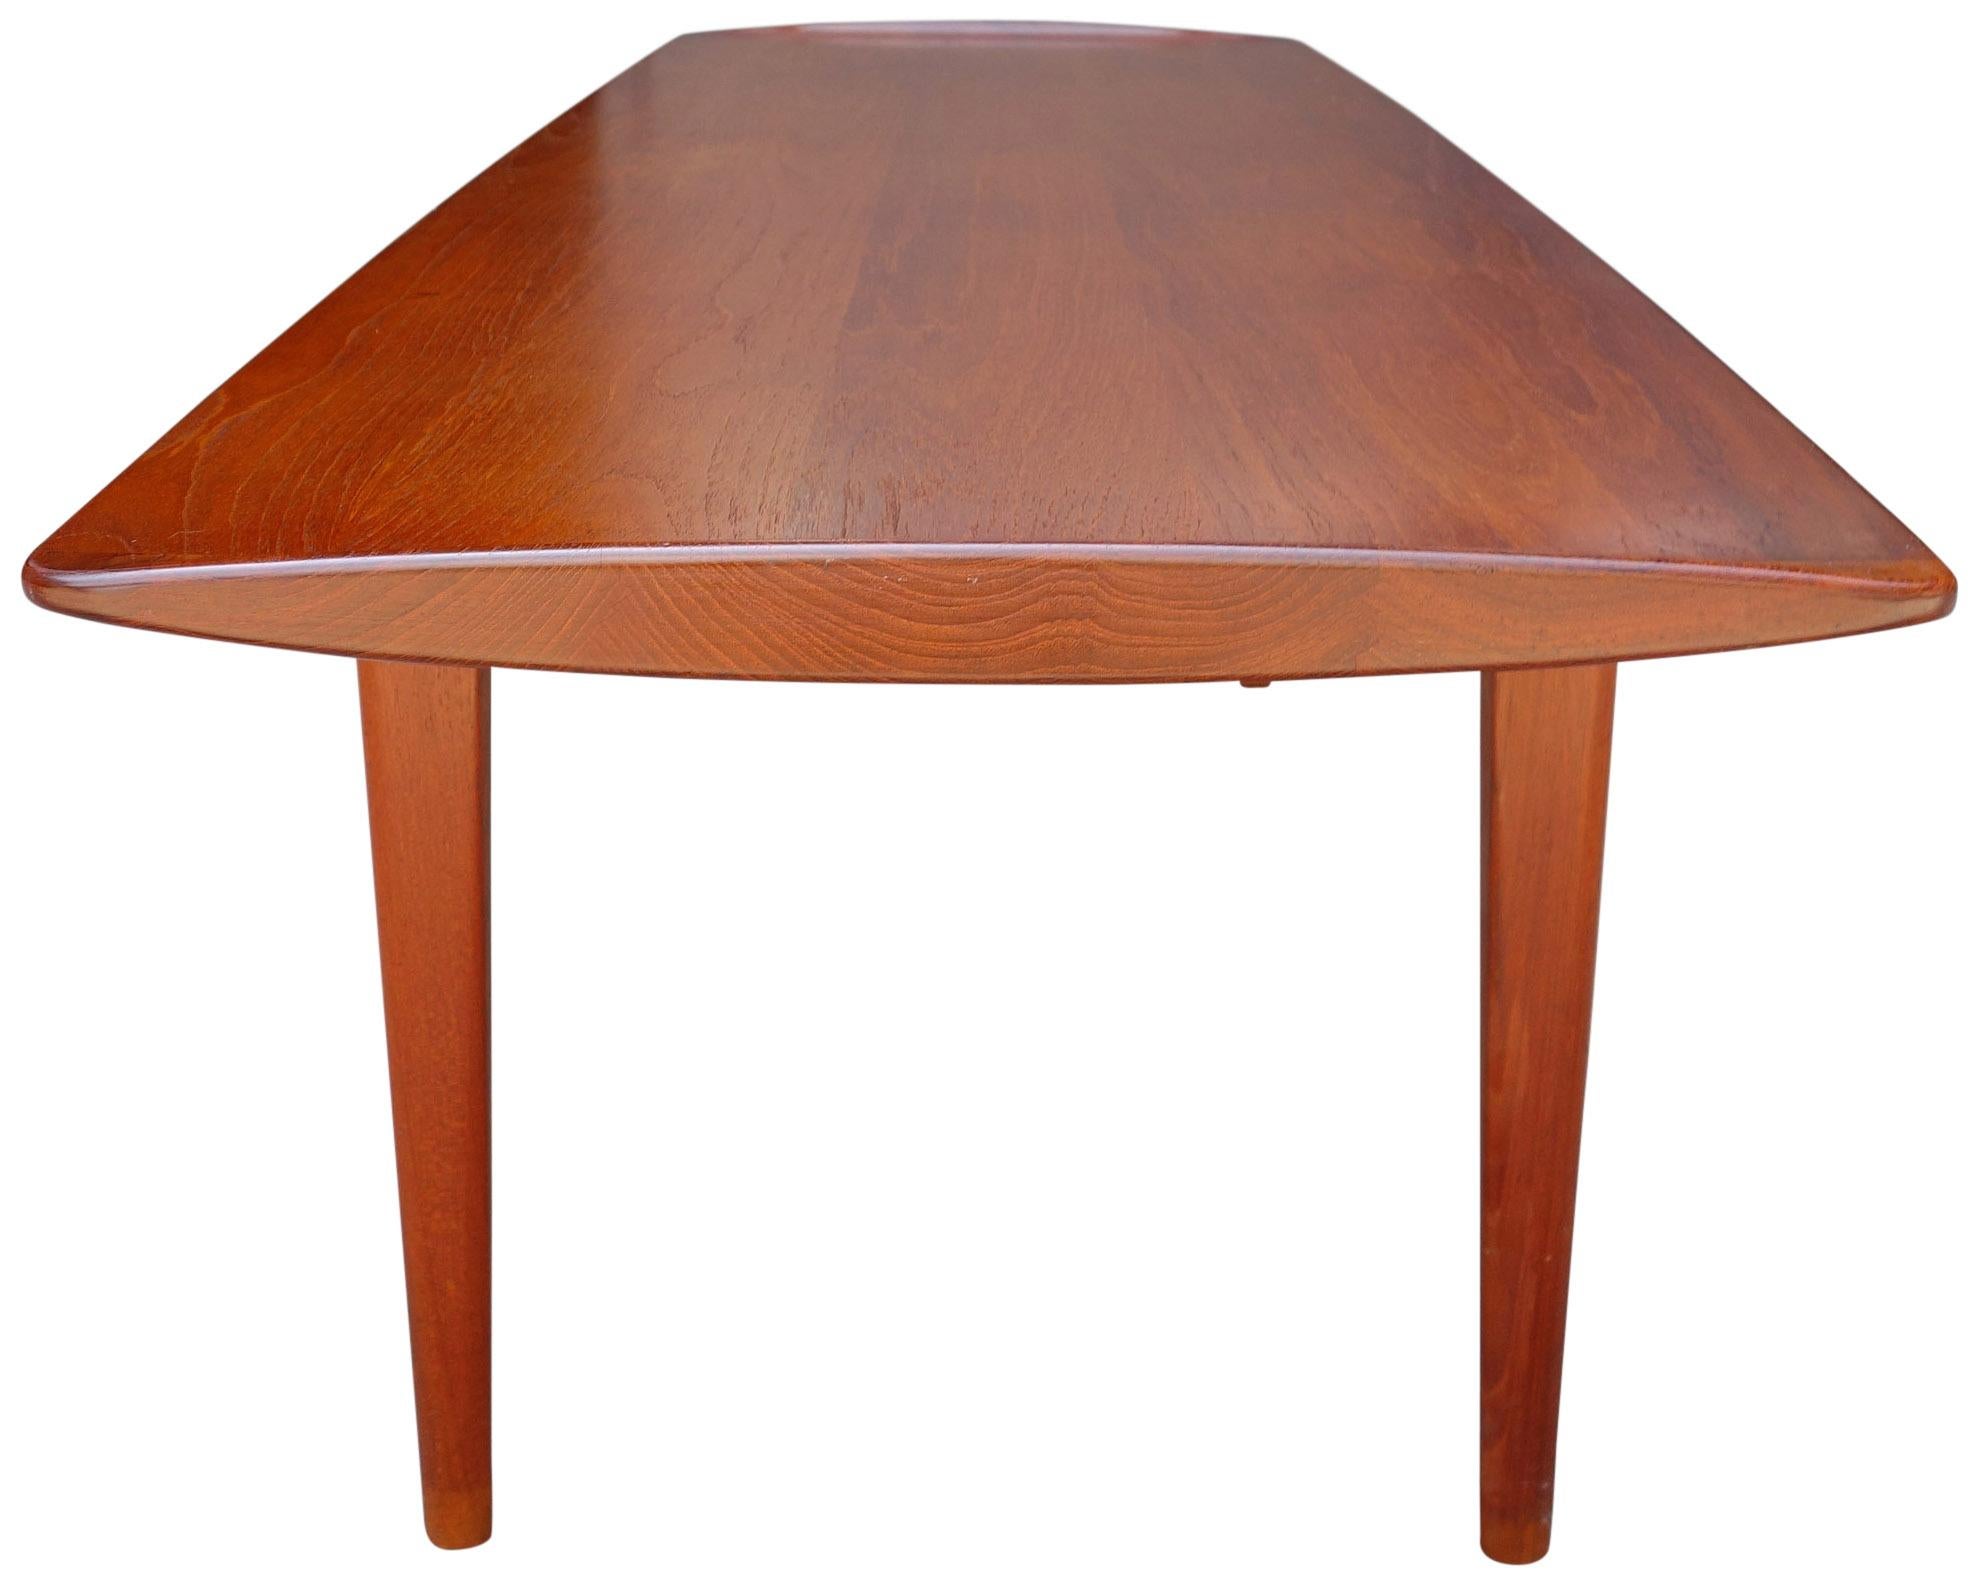 Midcentury Danish Modern Coffee Table by Kindt-Larsen for France and Daverkosen For Sale 2